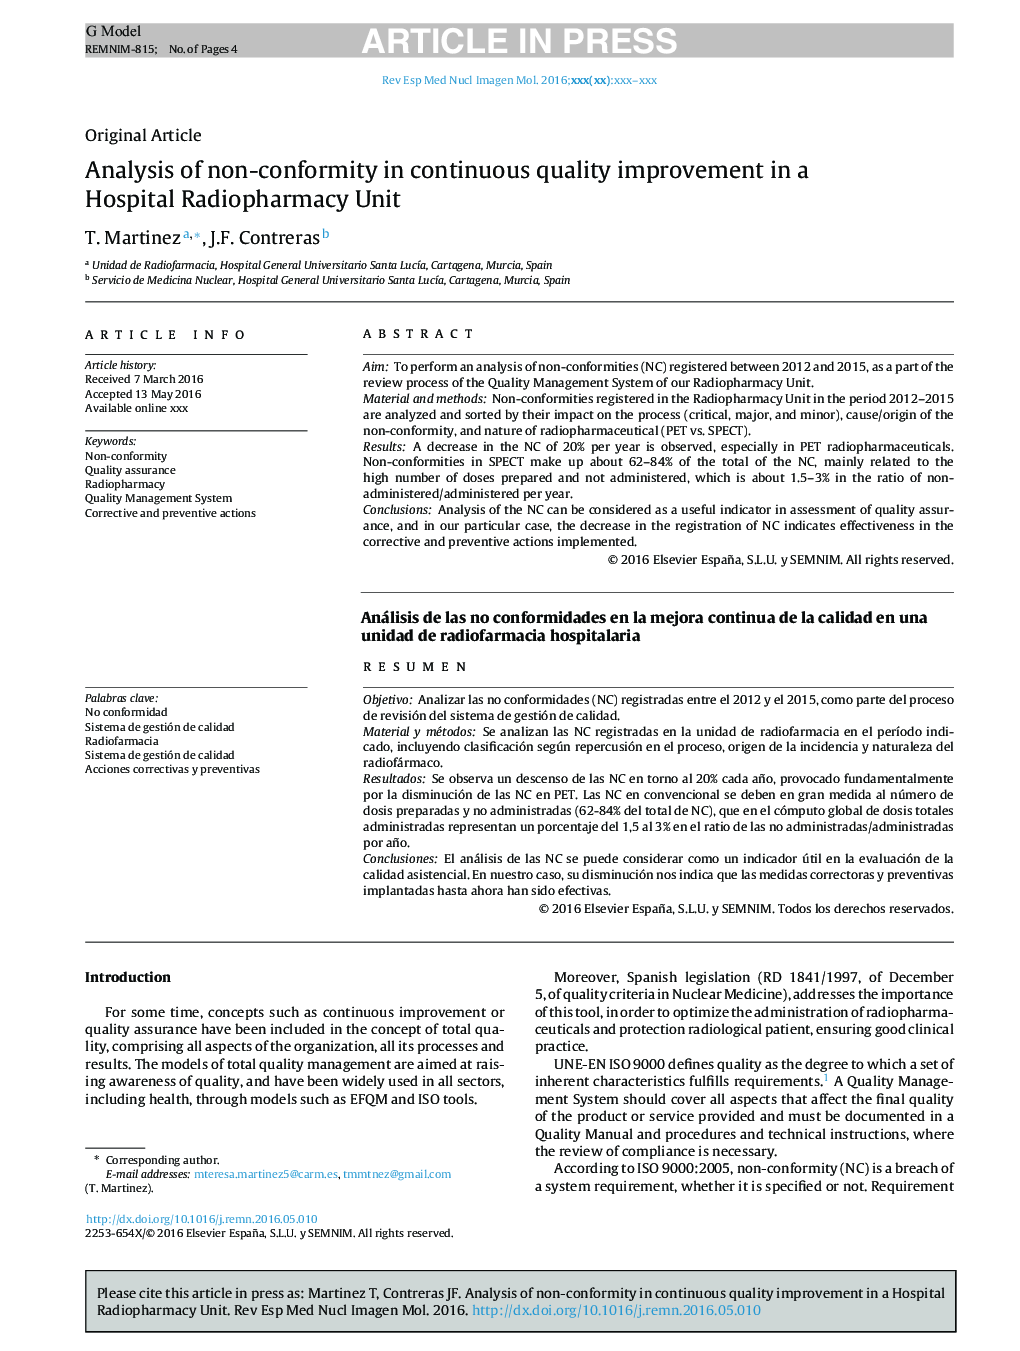 Analysis of non-conformity in continuous quality improvement in a Hospital Radiopharmacy Unit